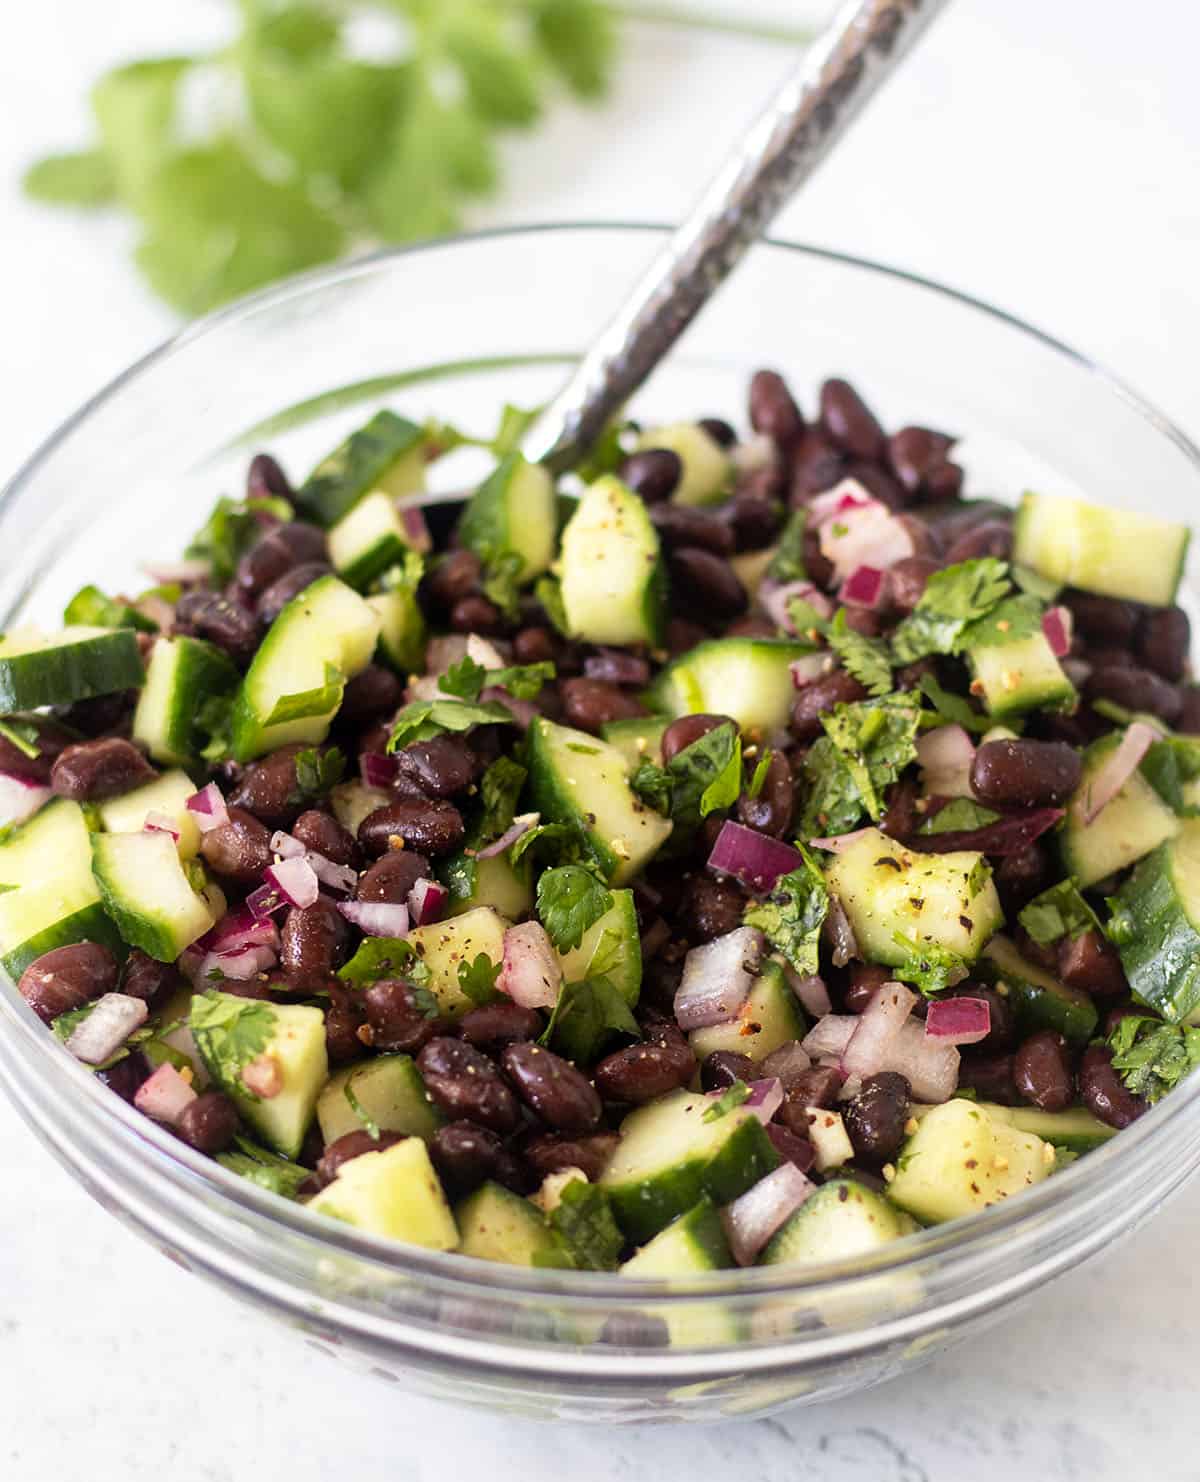 cucumber black bean salad in a clear glass bowl with a silver spoon for serving.